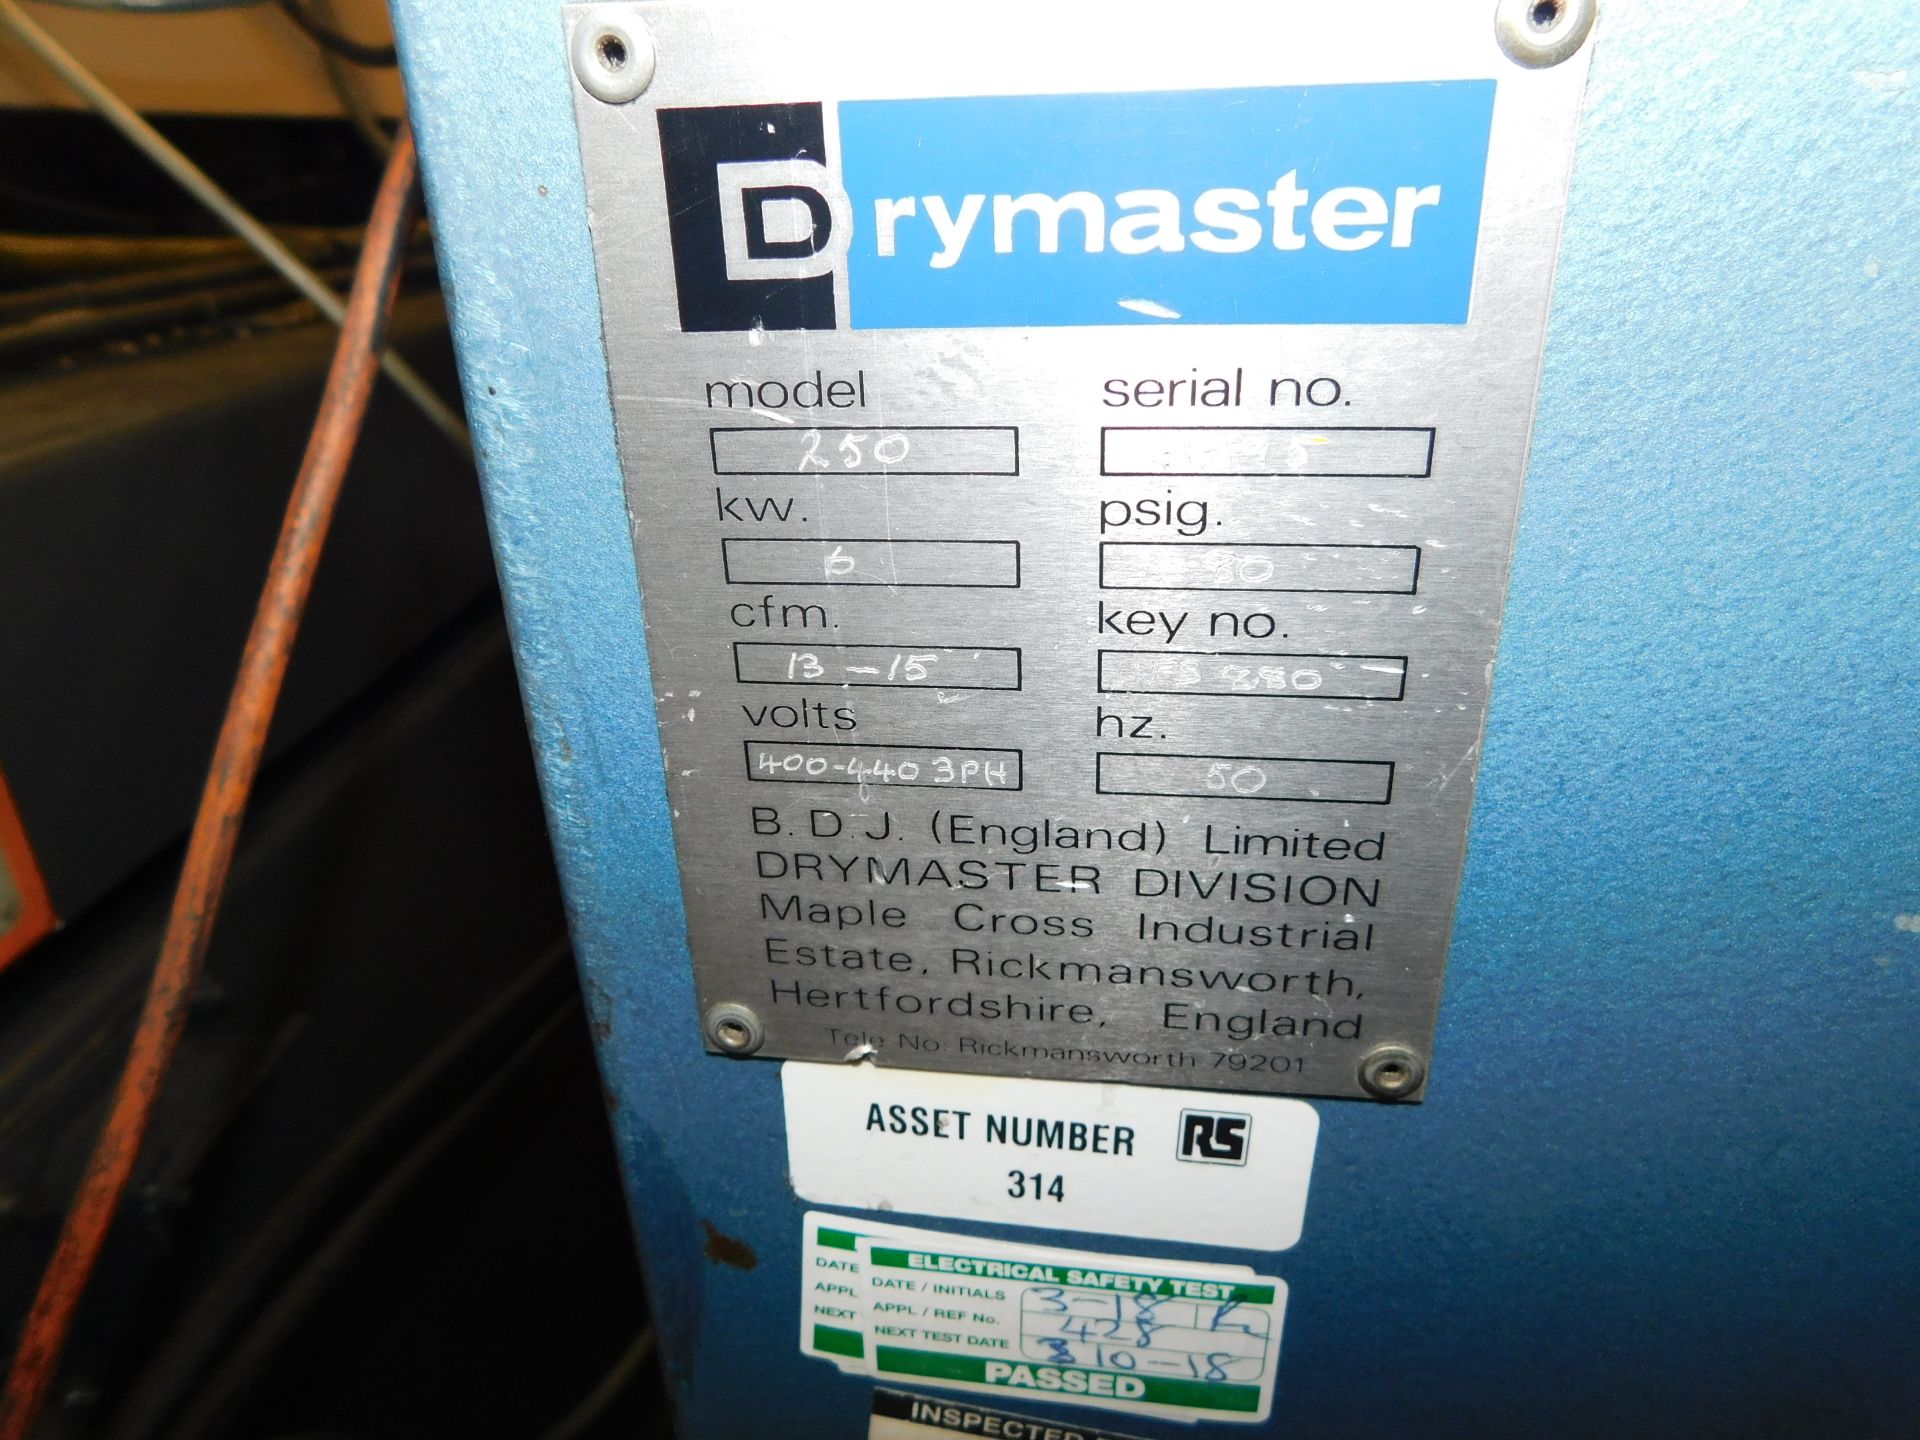 Drymaster Model 250 Mobile Dehumidifier, Serial Number: 3395 - Image 7 of 8